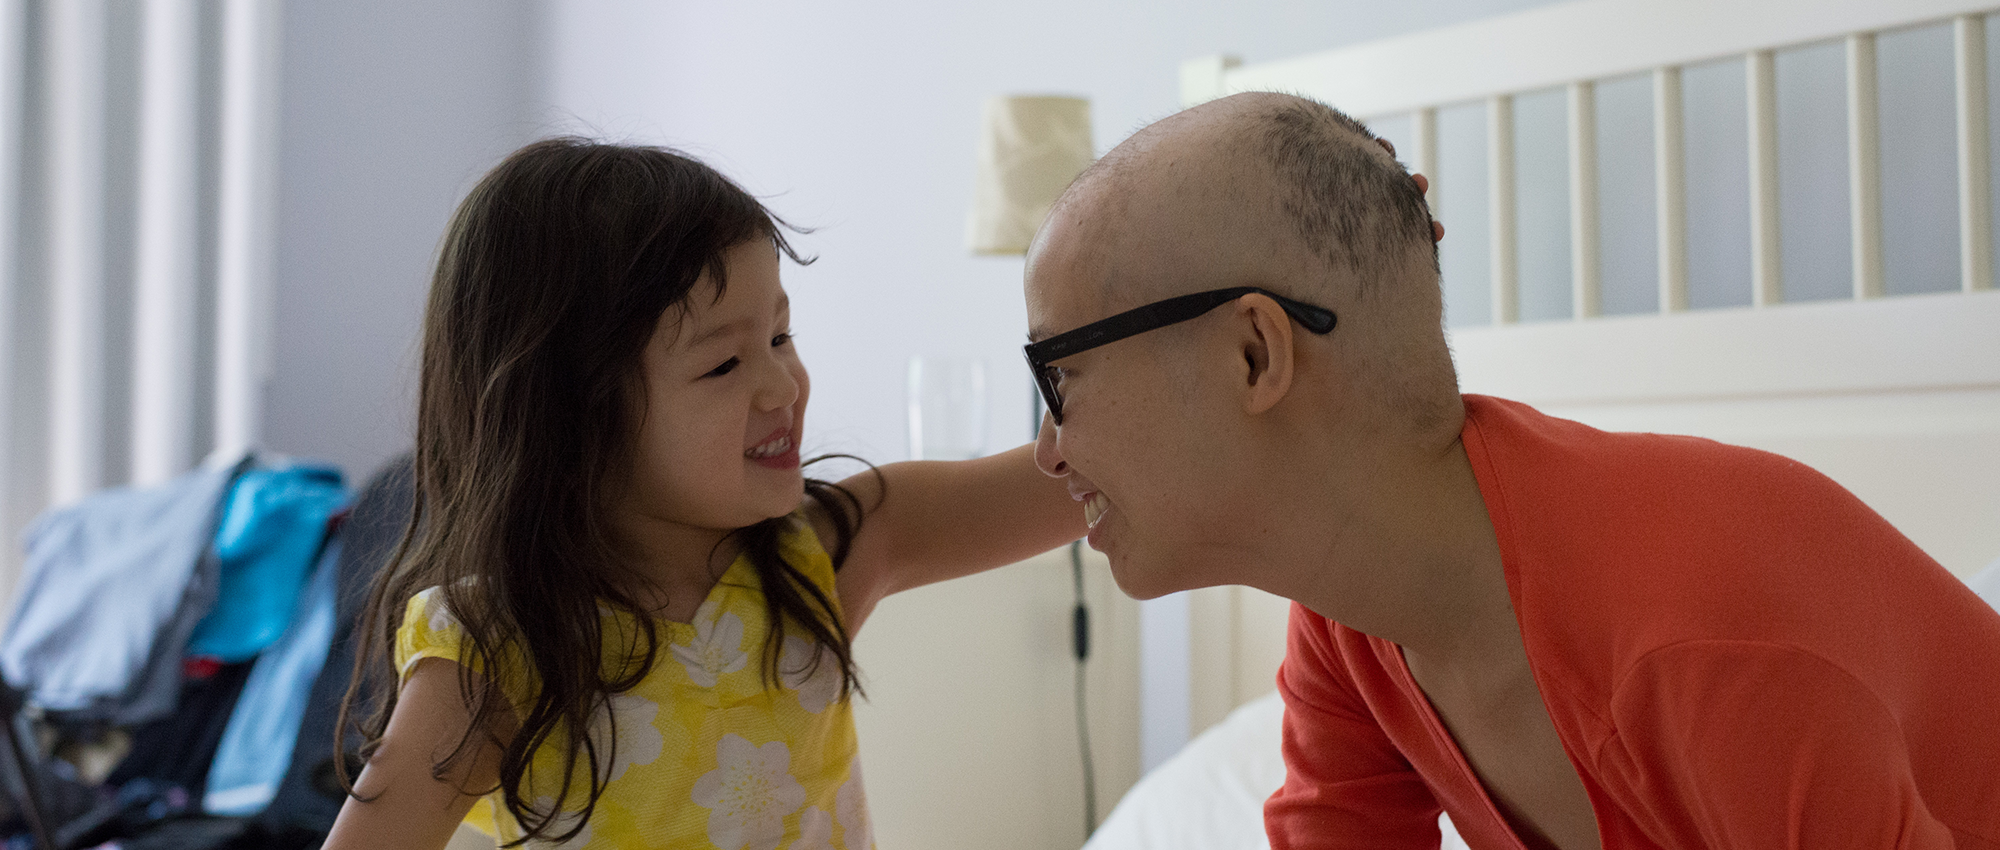 Stem cell recipient and advocate Mai Duong smiles with her daughter  